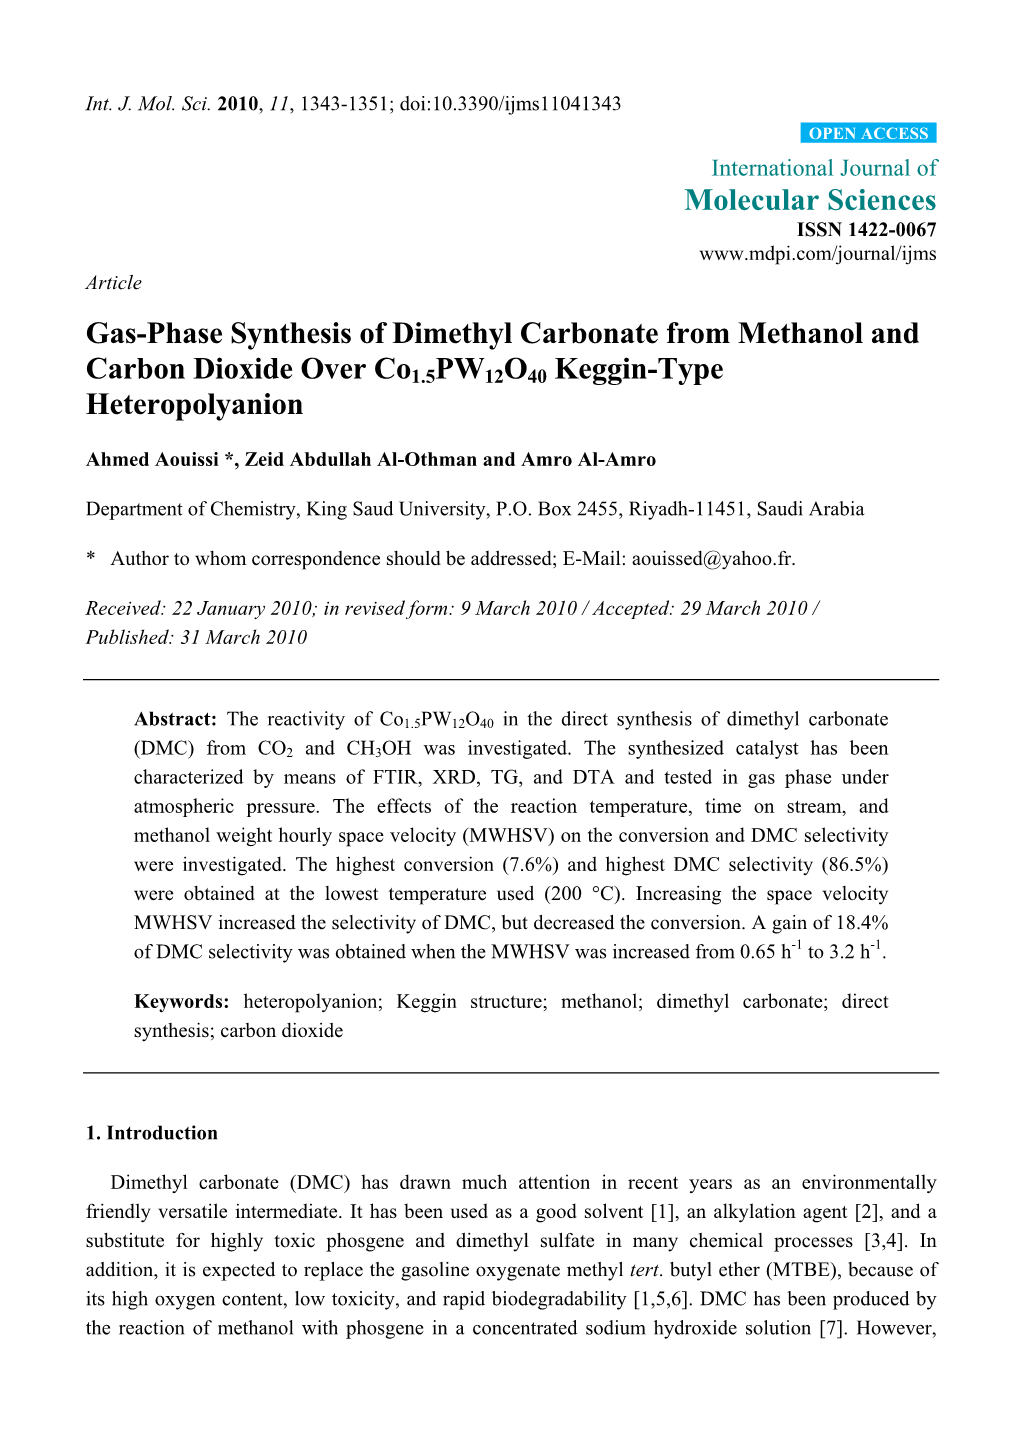 Gas-Phase Synthesis of Dimethyl Carbonate from Methanol and Carbon Dioxide Over Co1.5PW12O40 Keggin-Type Heteropolyanion